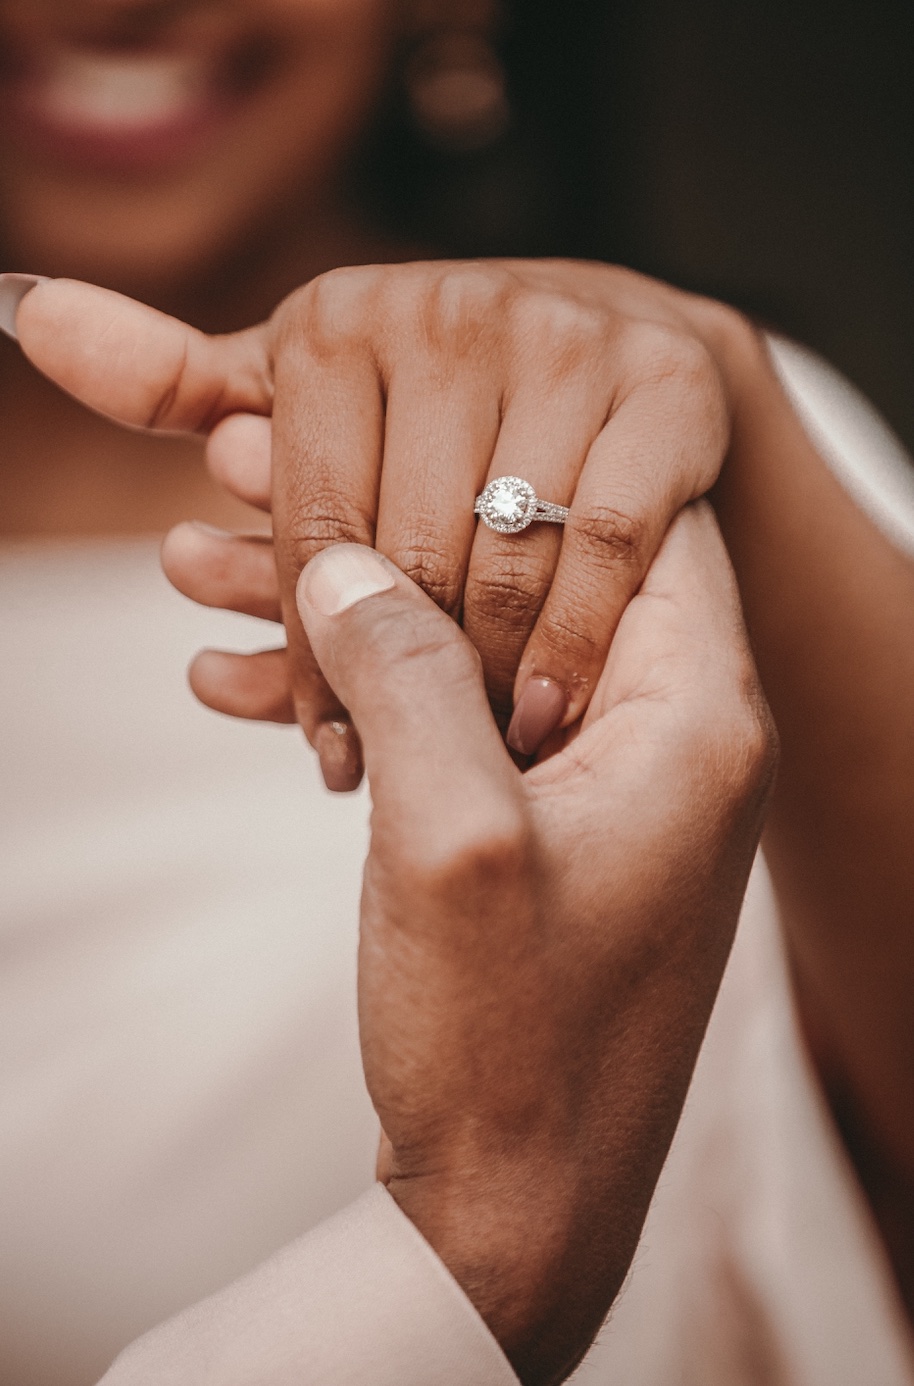 Couple holding hands, showing diamond ring; image by Alekon Pictures, via Unsplash.com.